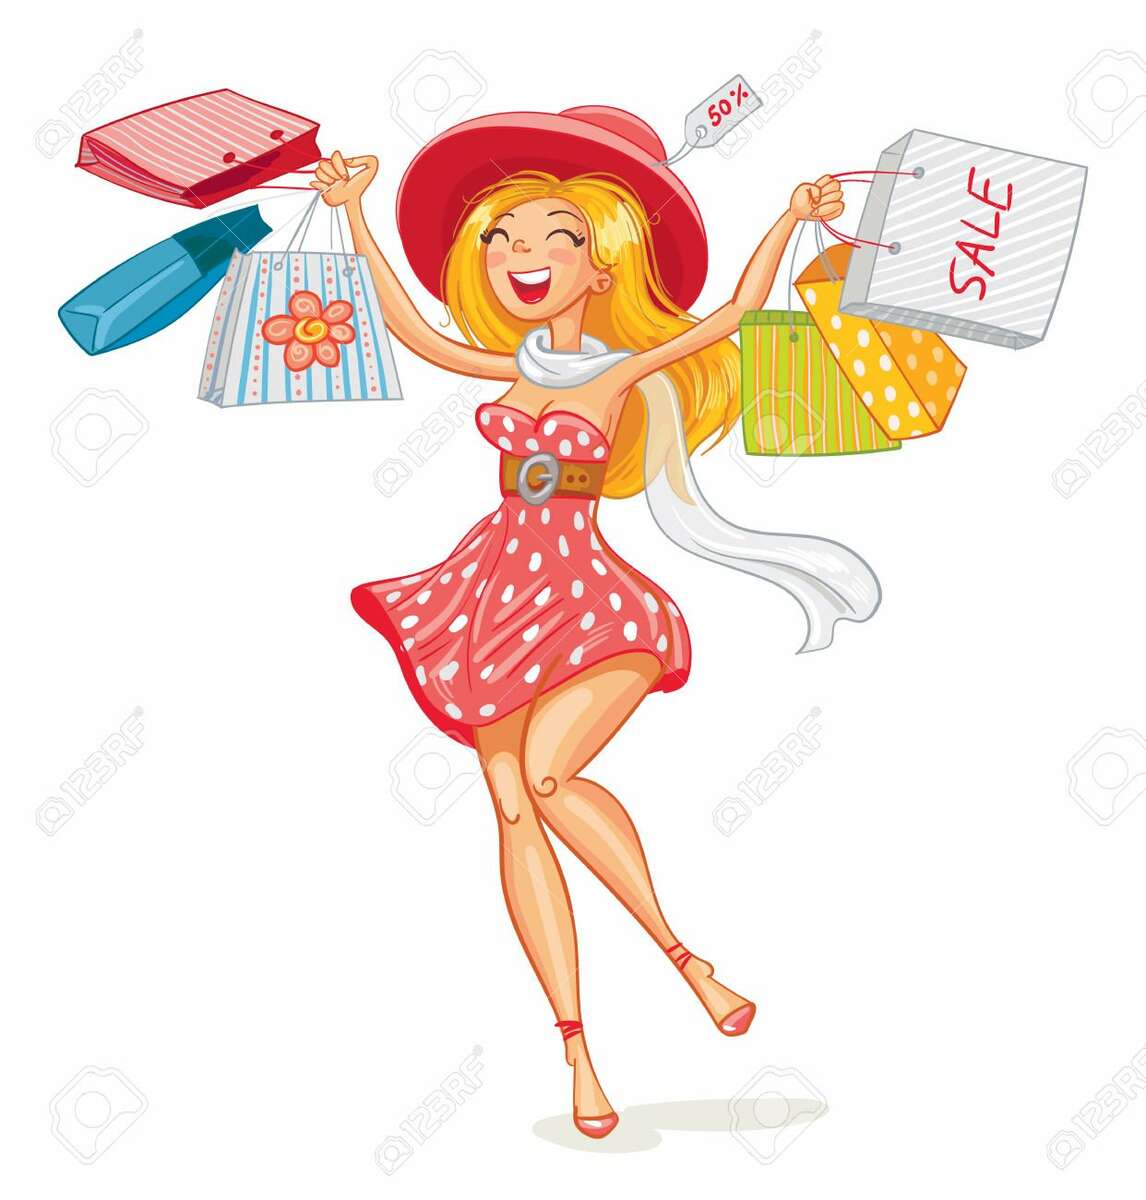 50125204-happy-girl-with-shopping-bags-in-shop-shopper-sales-funny-stock-photo